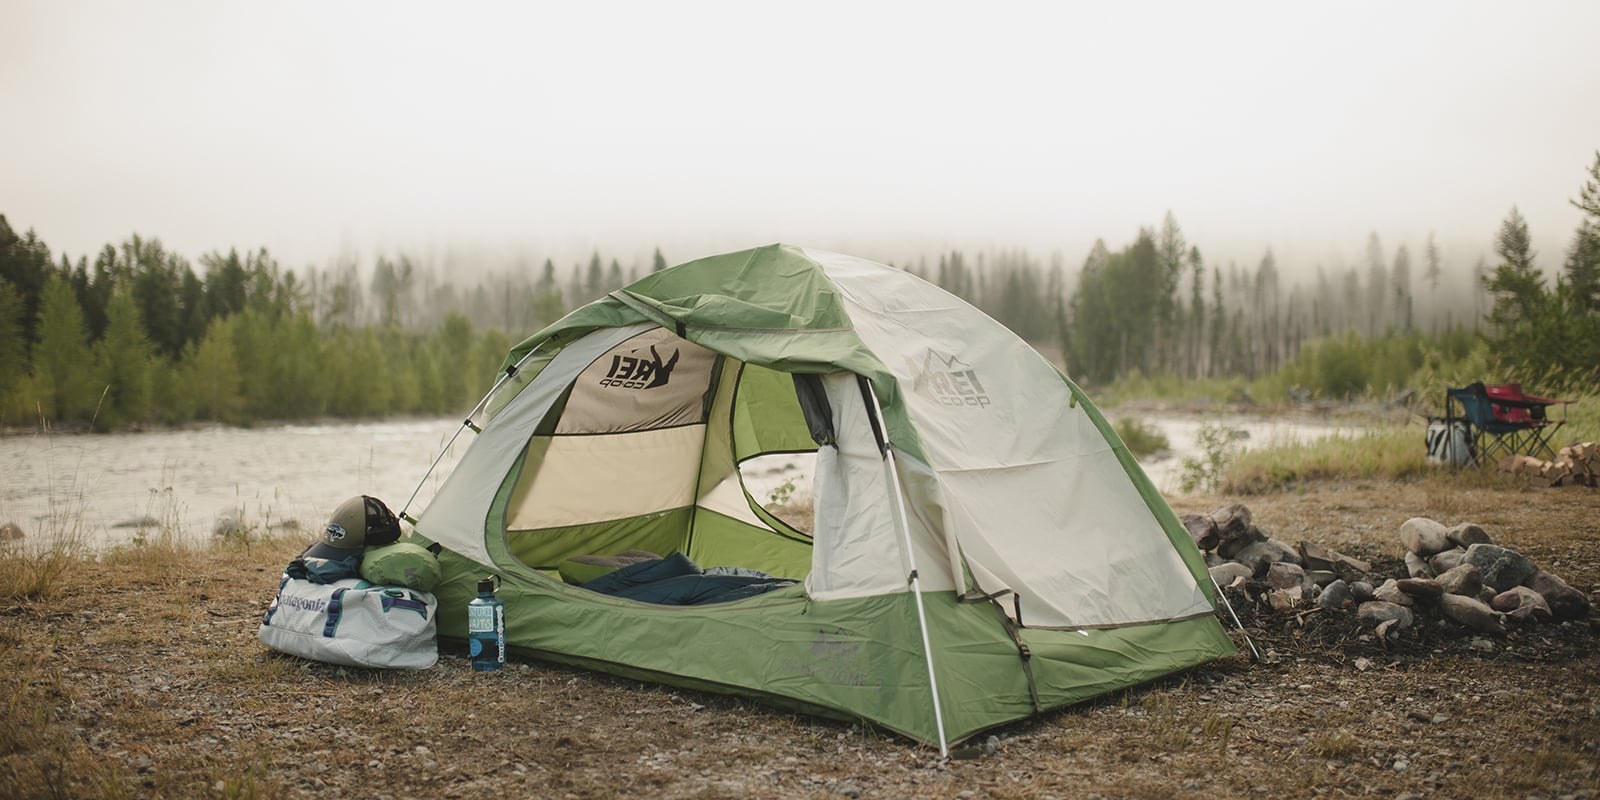 Outdoor camping Advice To Make The Trip Greater